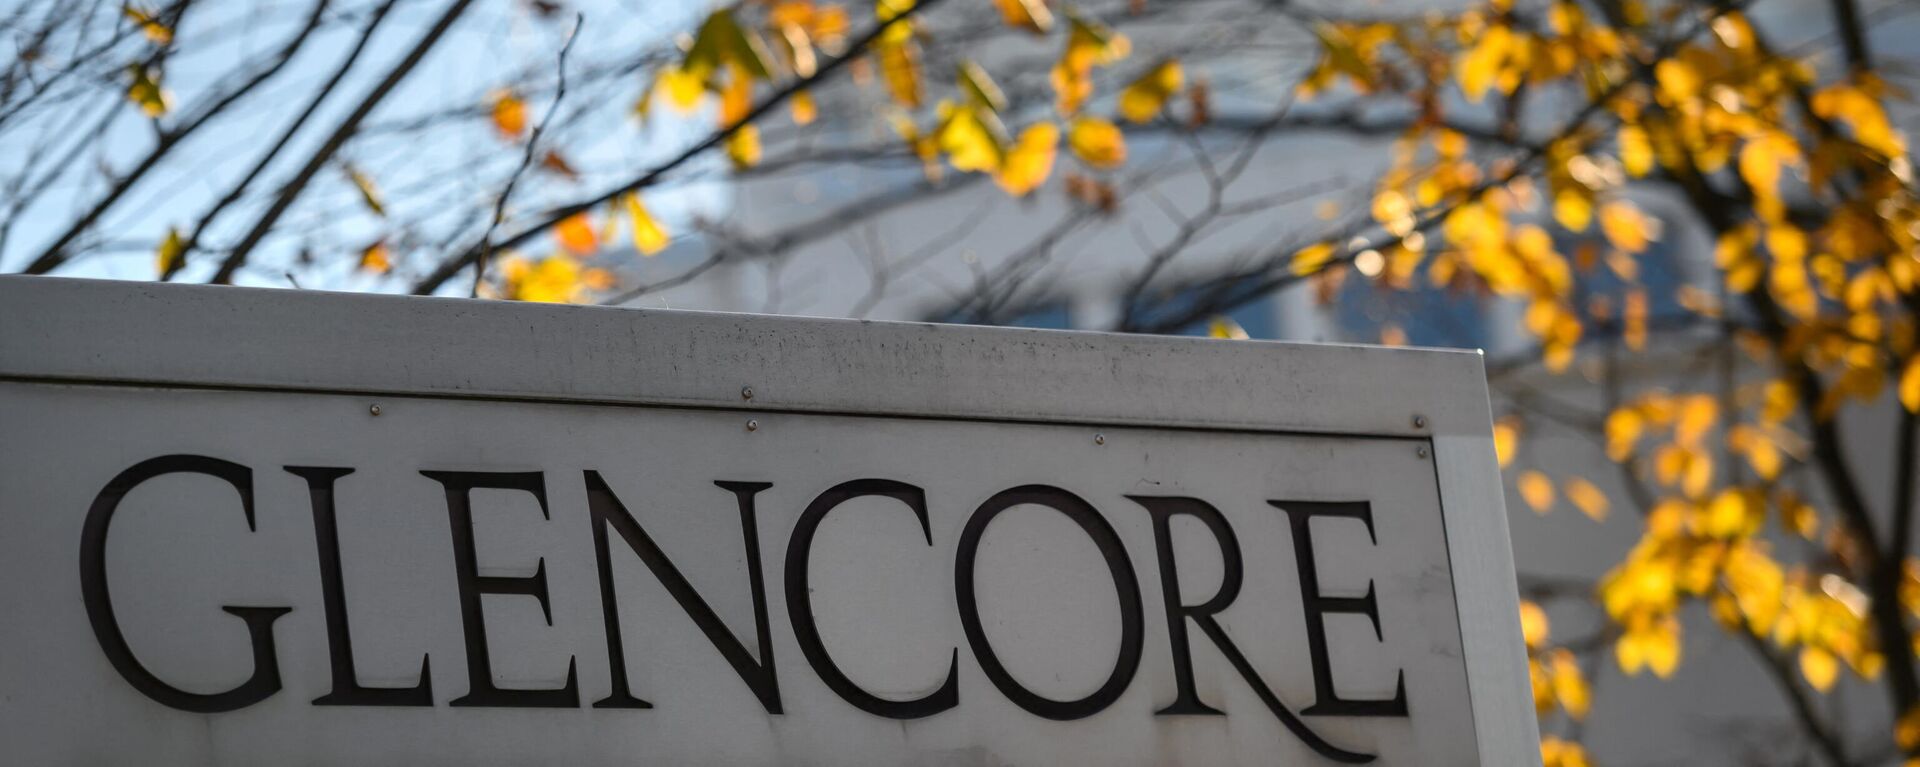 A picture taken on November 13, 2020 shows the headquarters of Swiss commodity trading giant Glencore in Baar, central Switzerland, ahead of November 29, 2020 nationwide vote on a people's initiative to impose due diligence rules on Swiss-based firms active abroad. - Sputnik International, 1920, 04.11.2022